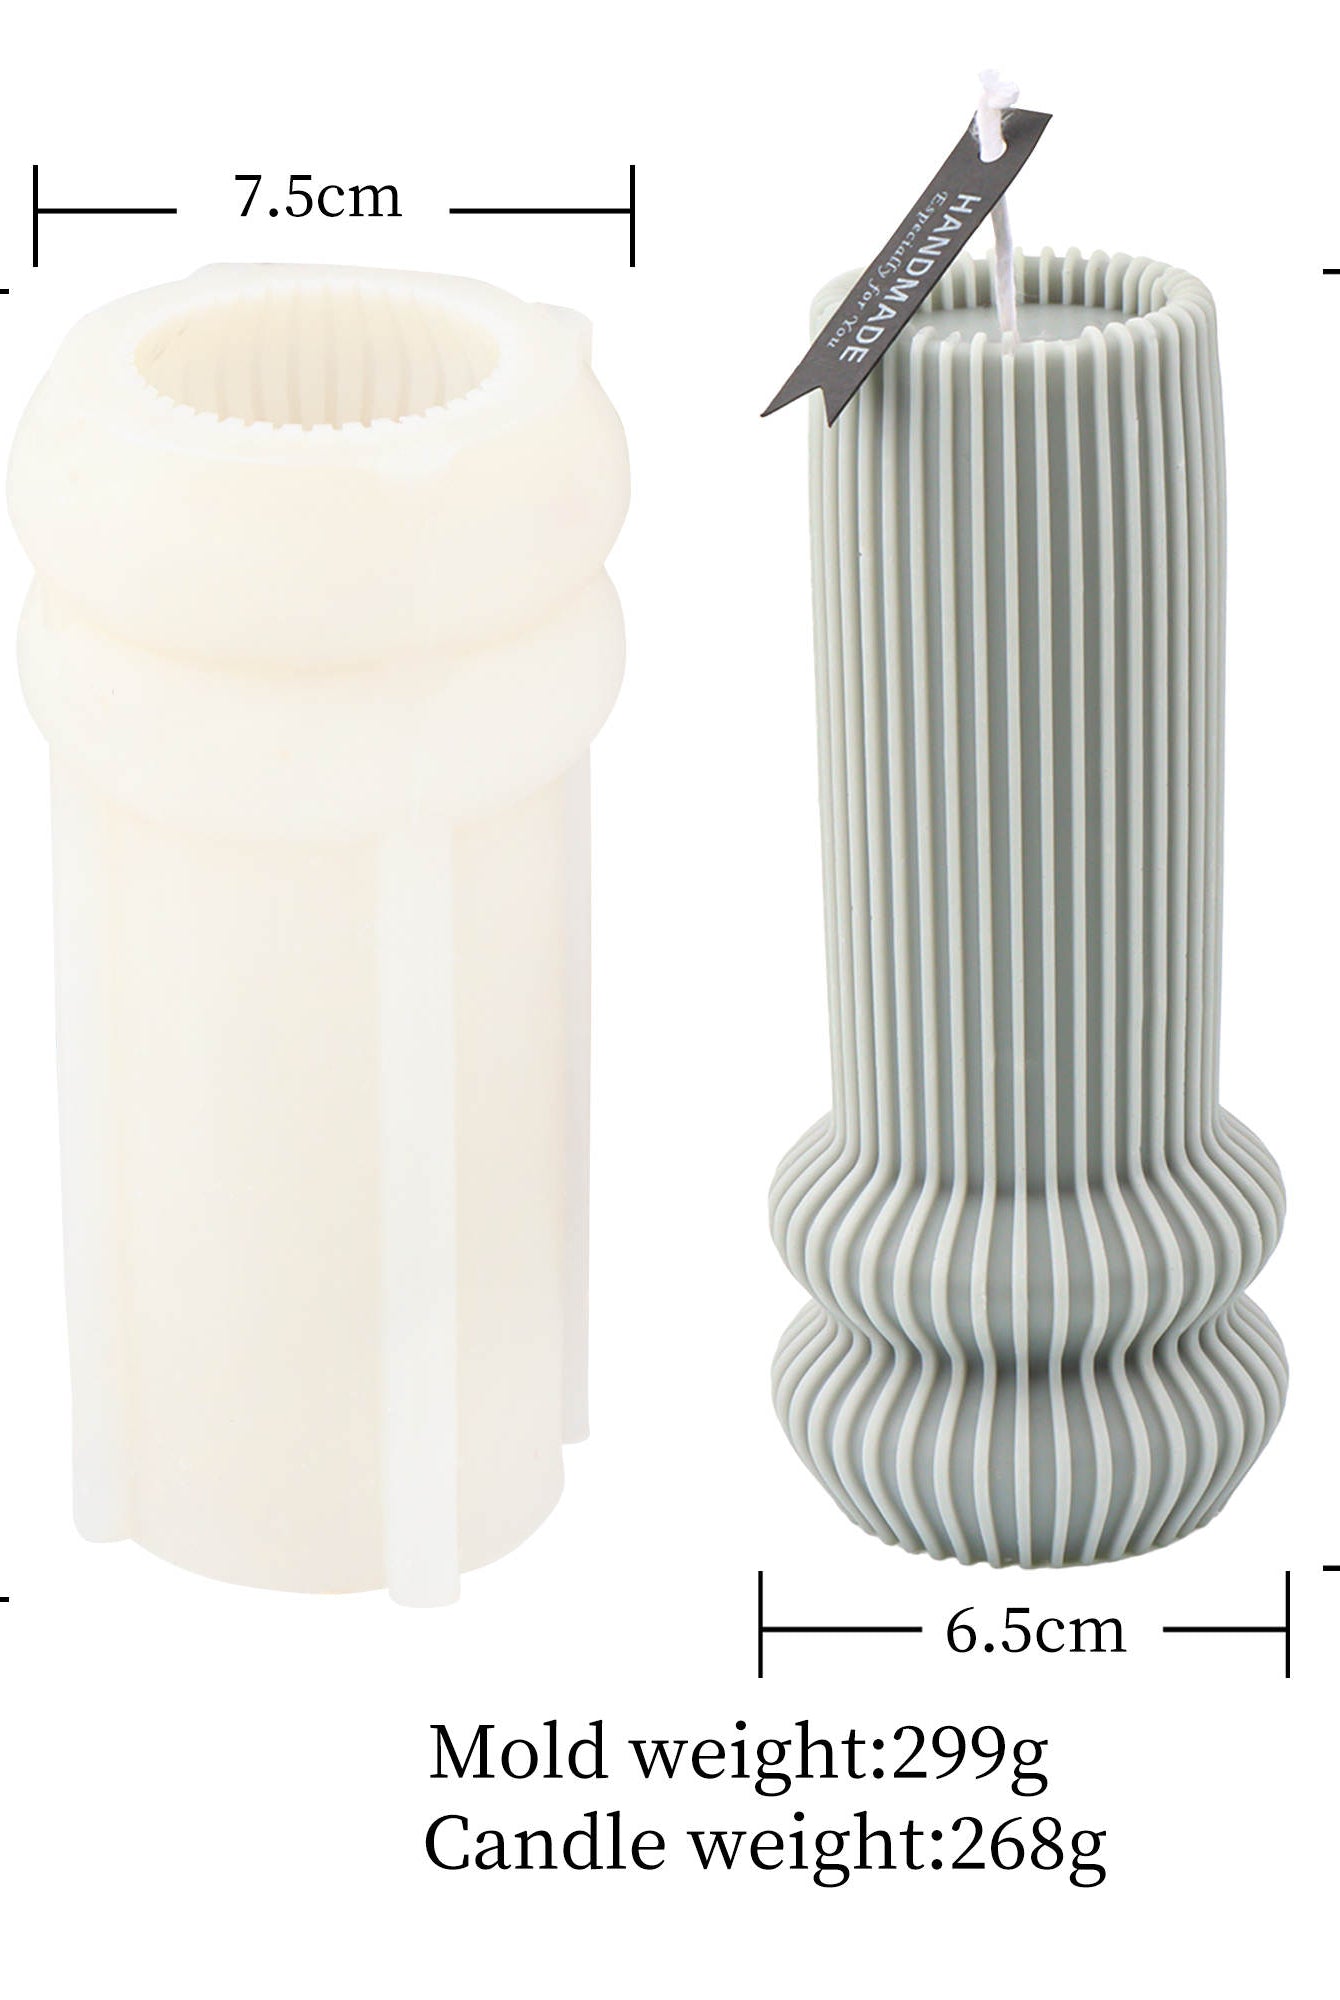 Nordic Vase Candle Moulds 4 - Silicone Mould, Mold for DIY Candles. Created using candle making kit with cotton candle wicks and candle colour chips. Using soy wax for pillar candles. Sold by Myka Candles Moulds Australia